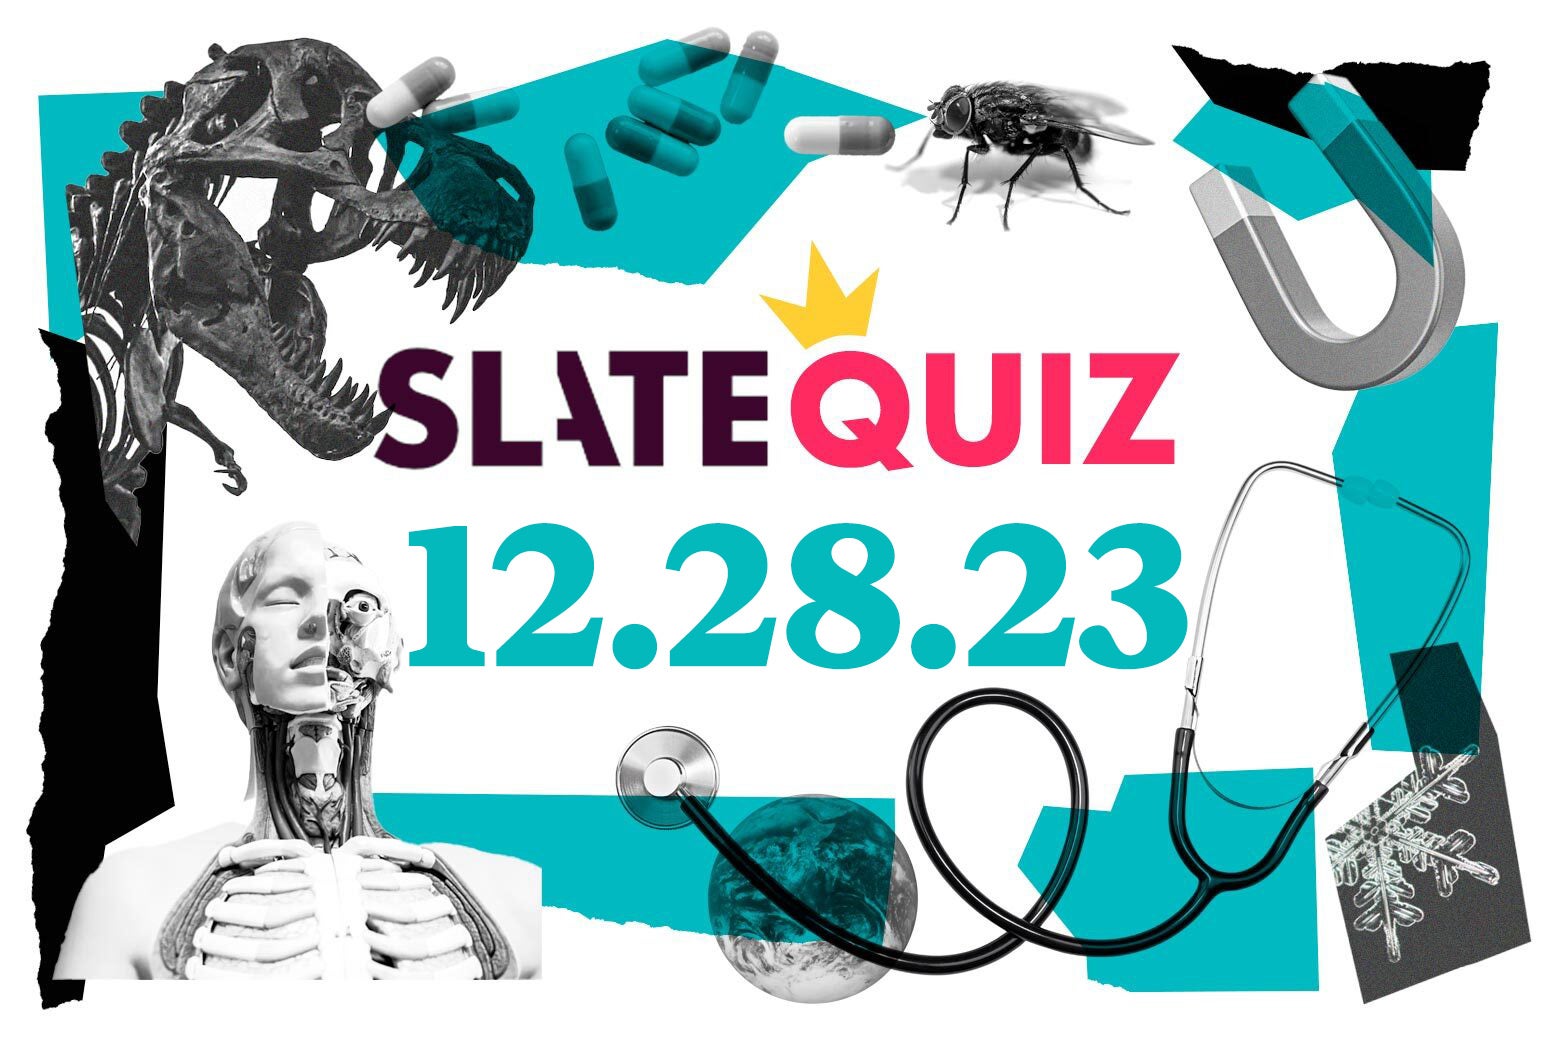 Slate’s Science Daily: A Daily Game of Questions